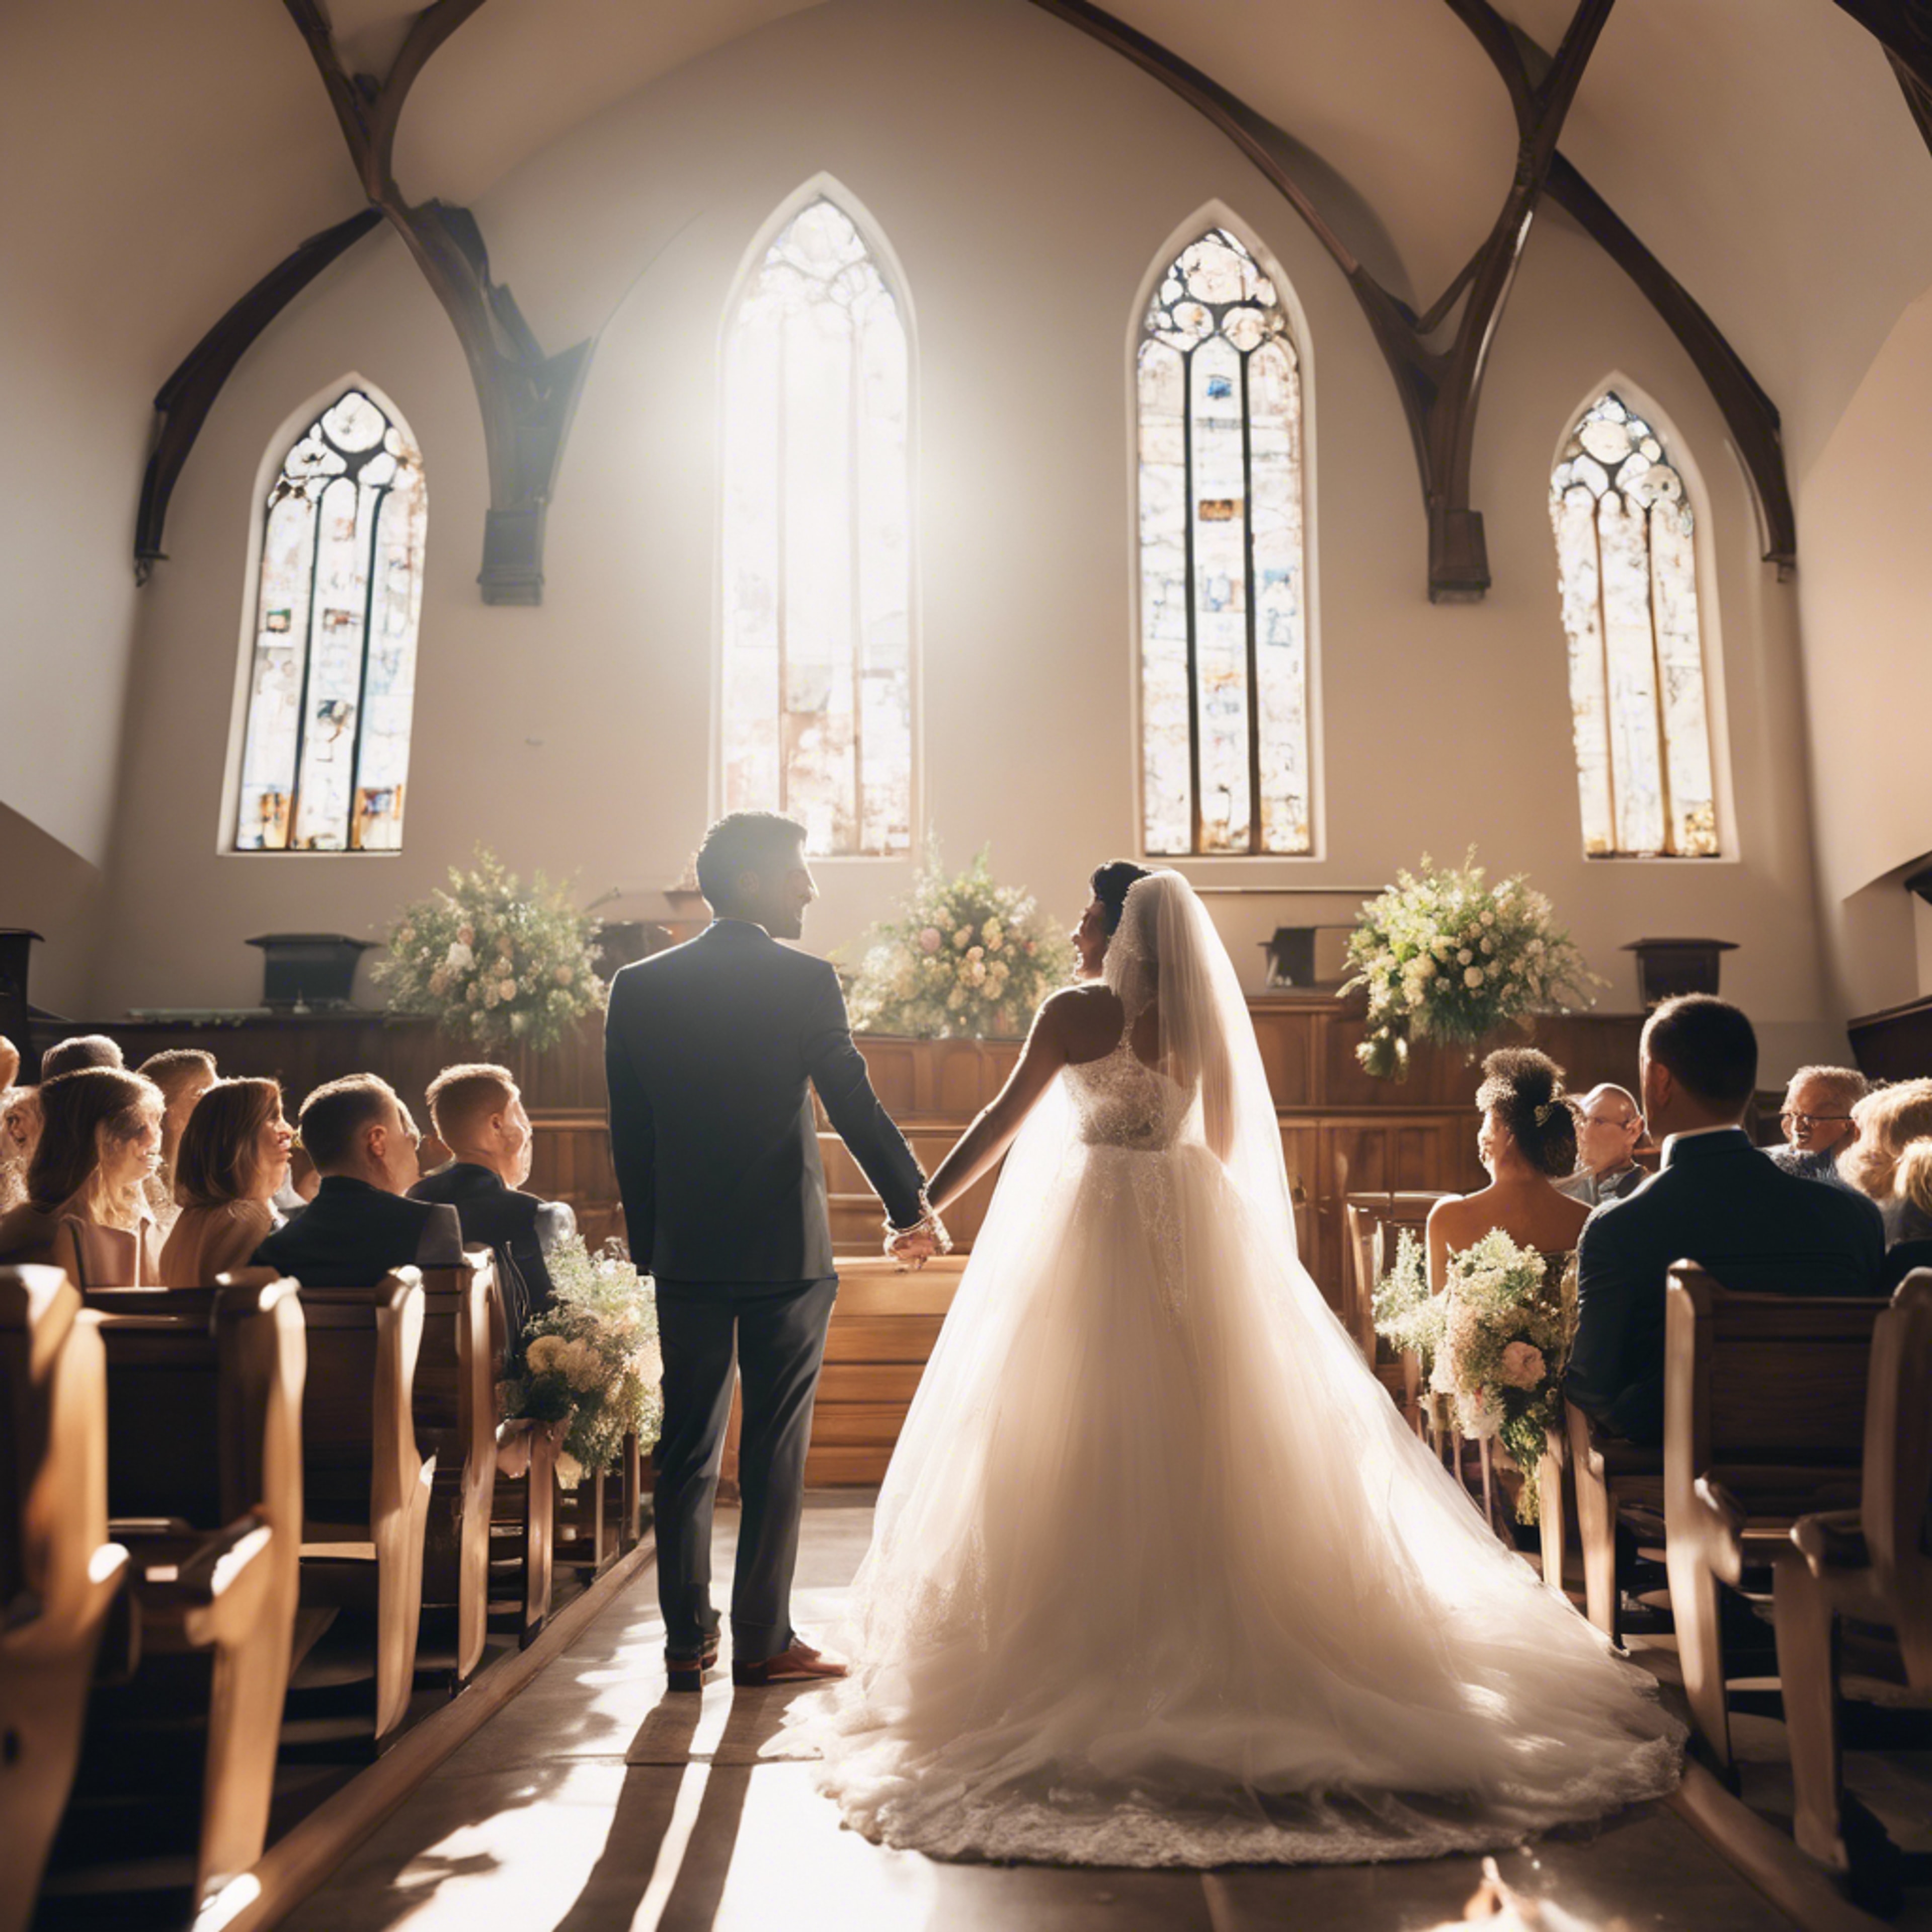 A happy couple getting married in a sunlit church, filled with joy and love. Behang[c91a19bd1c8e4c9b9bbb]